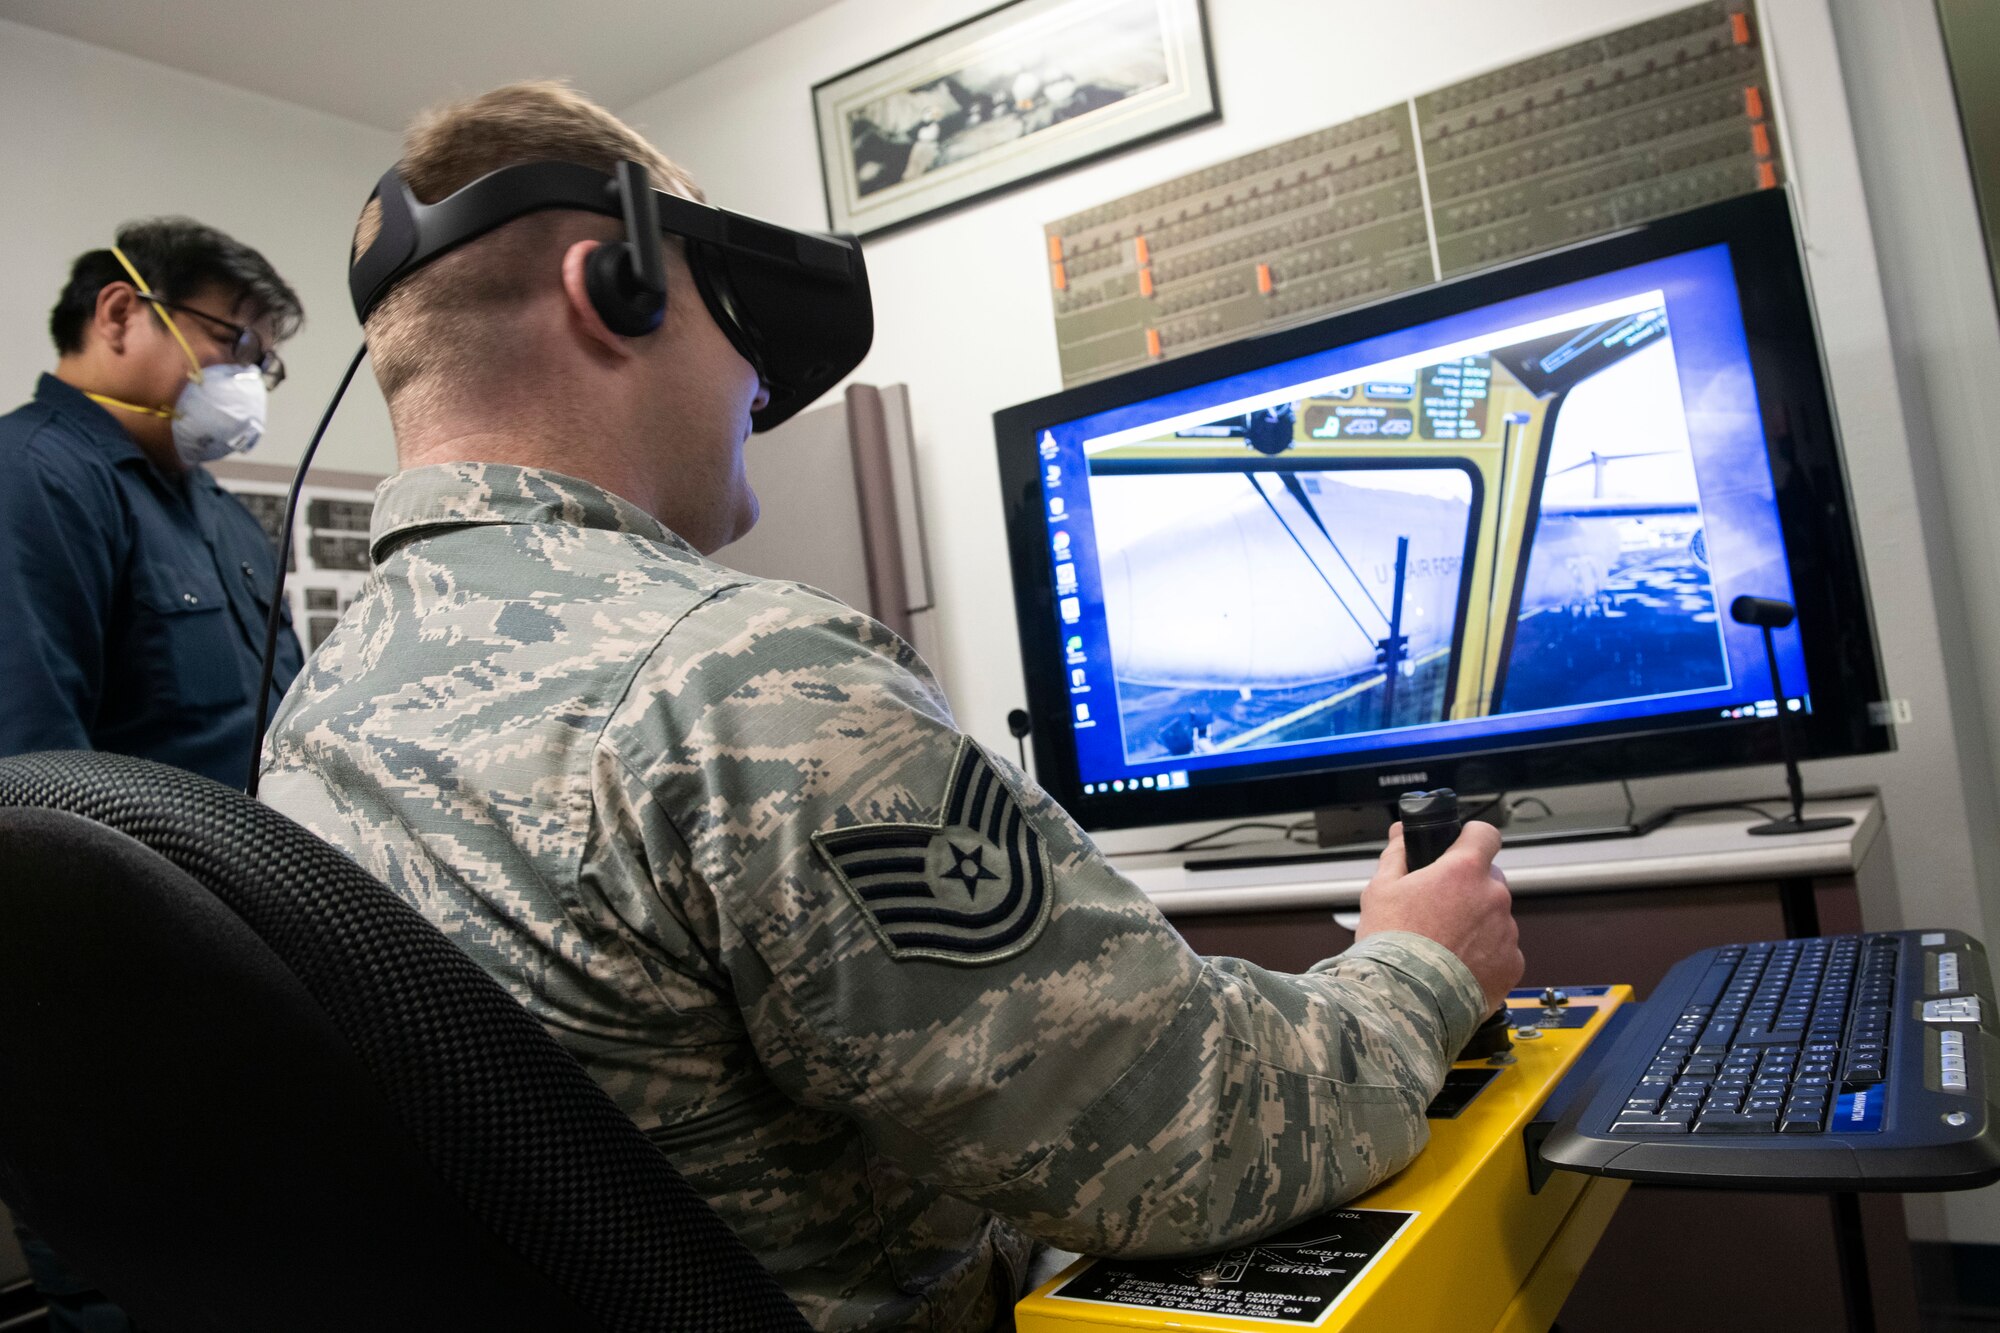 The deicing simulator allows the Airmen to train year-round while saving the Air Force millions of dollars in deicing fluid, equipment maintenance and reduces the risk of potential aircraft damages.